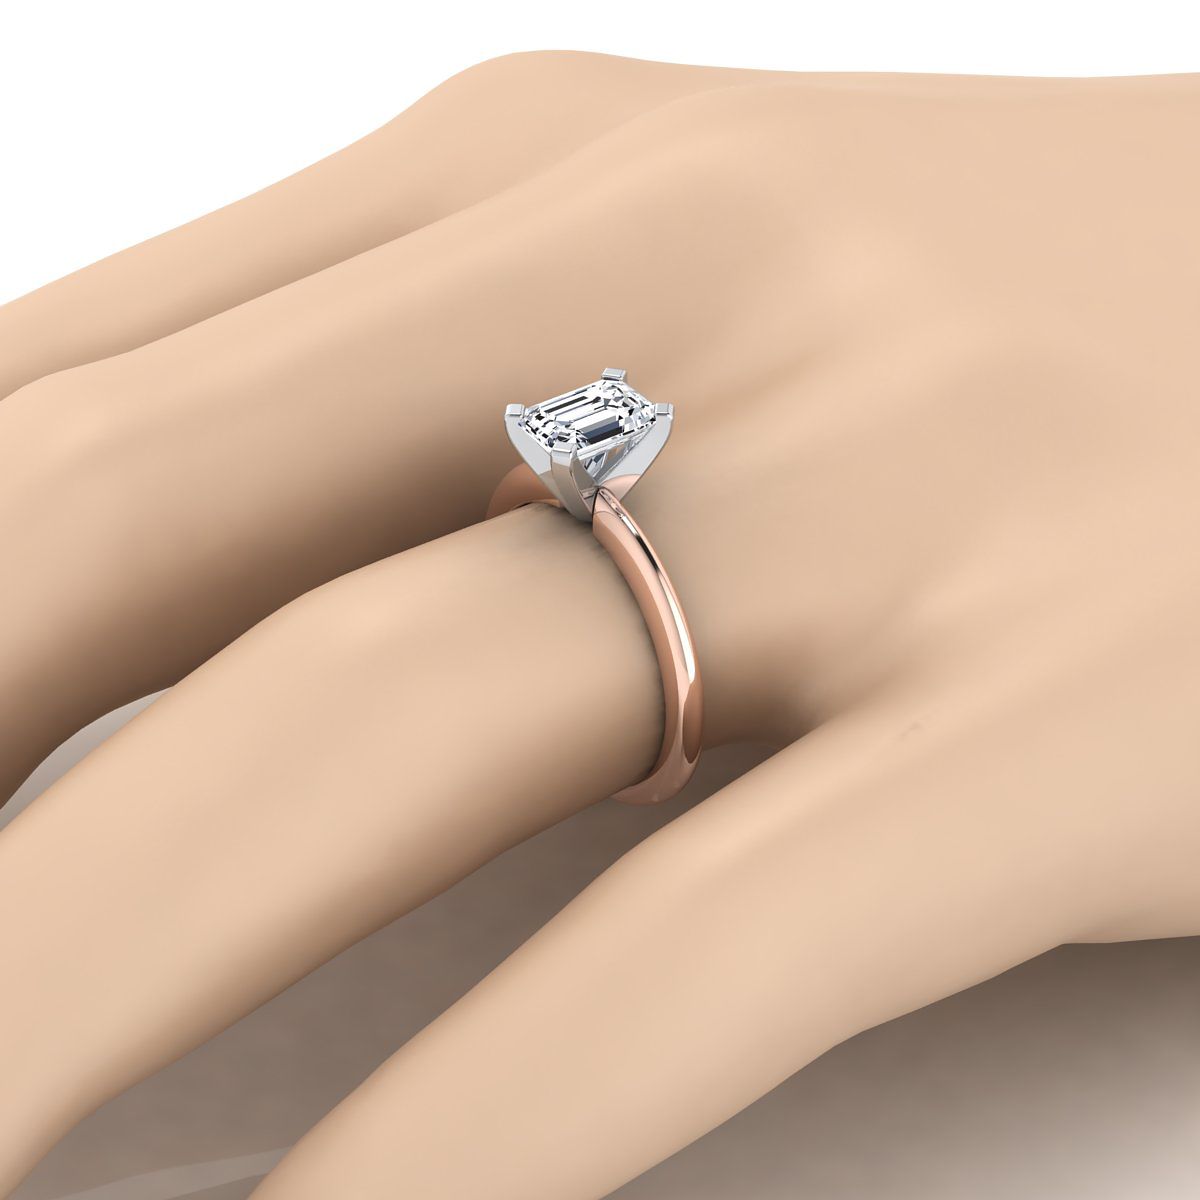 14K Rose Gold Emerald Cut  Classic Low Base Solitaire Engagement Ring